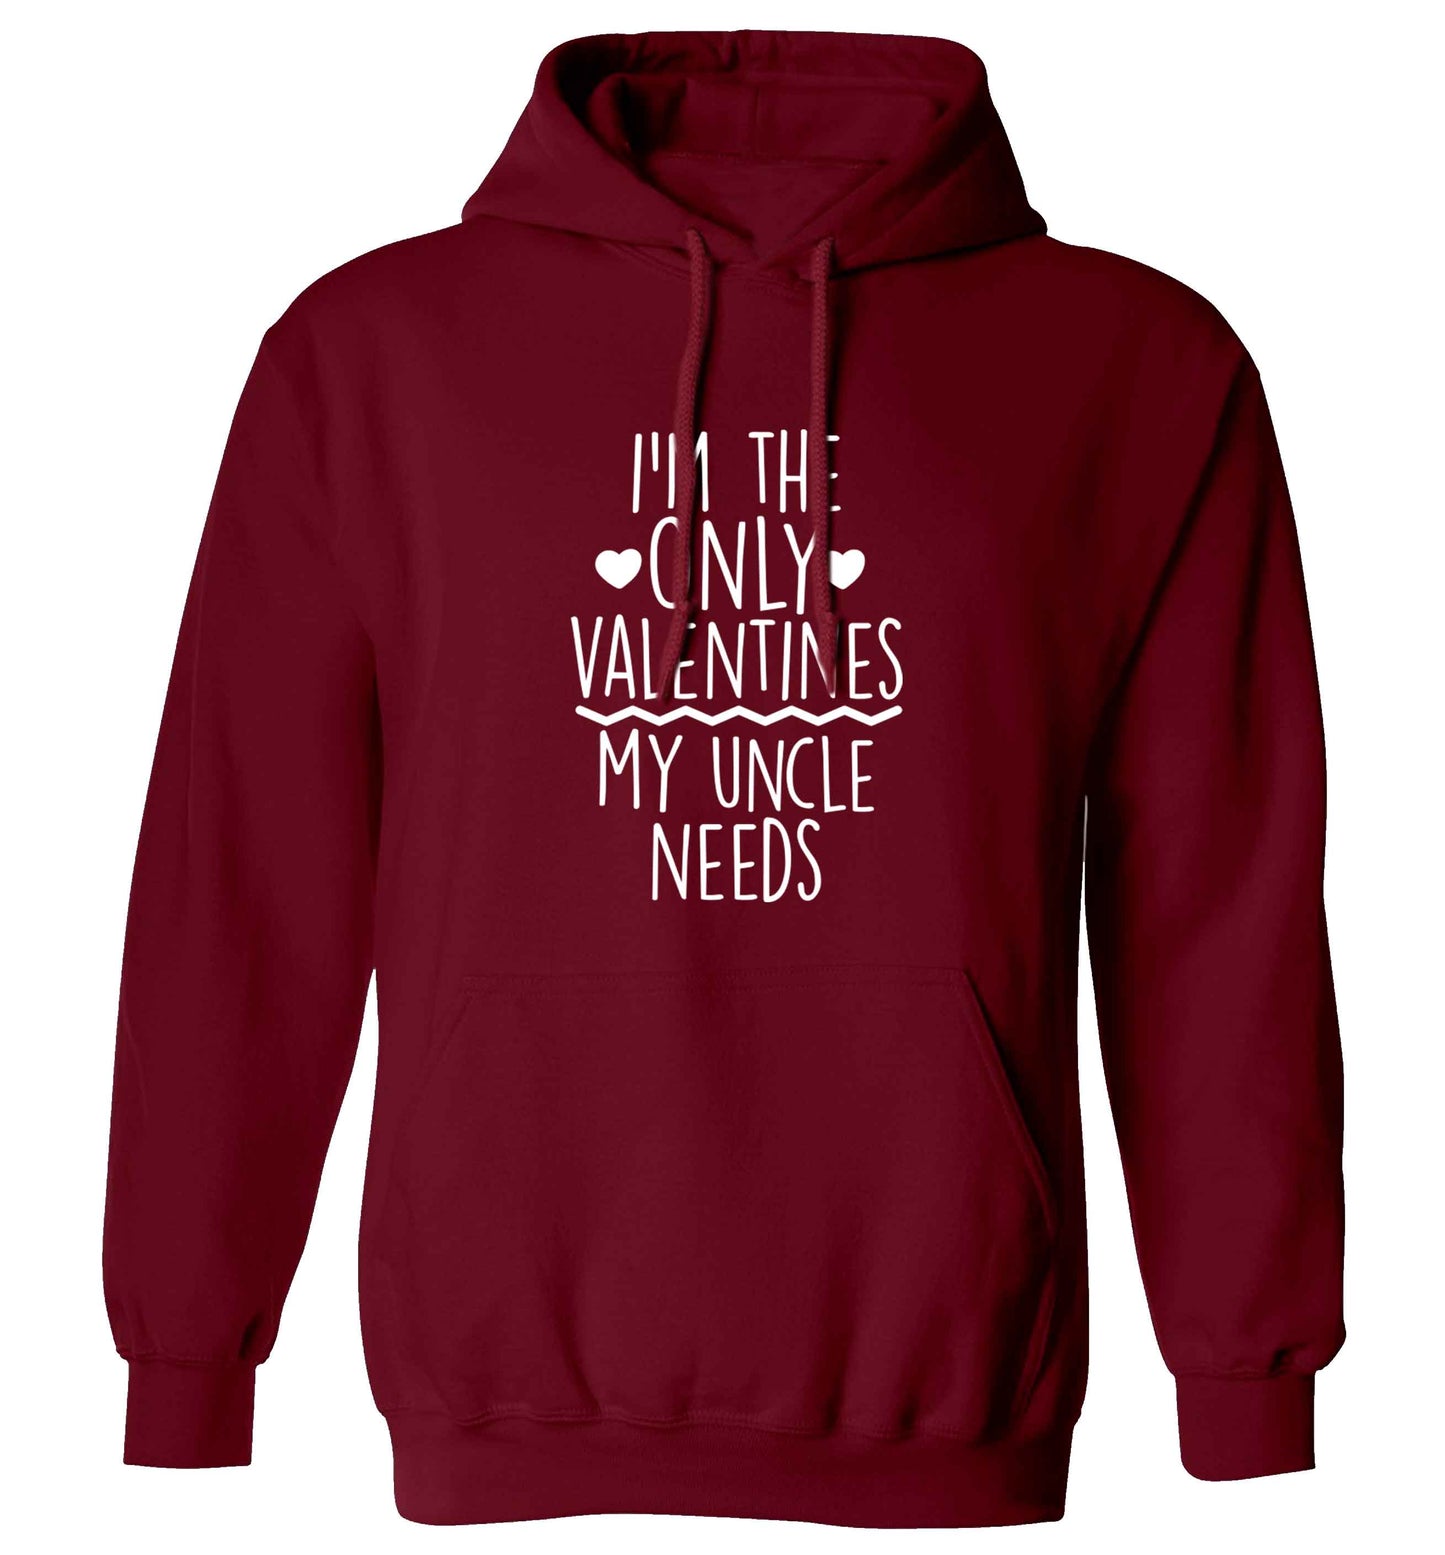 I'm the only valentines my uncle needs adults unisex maroon hoodie 2XL